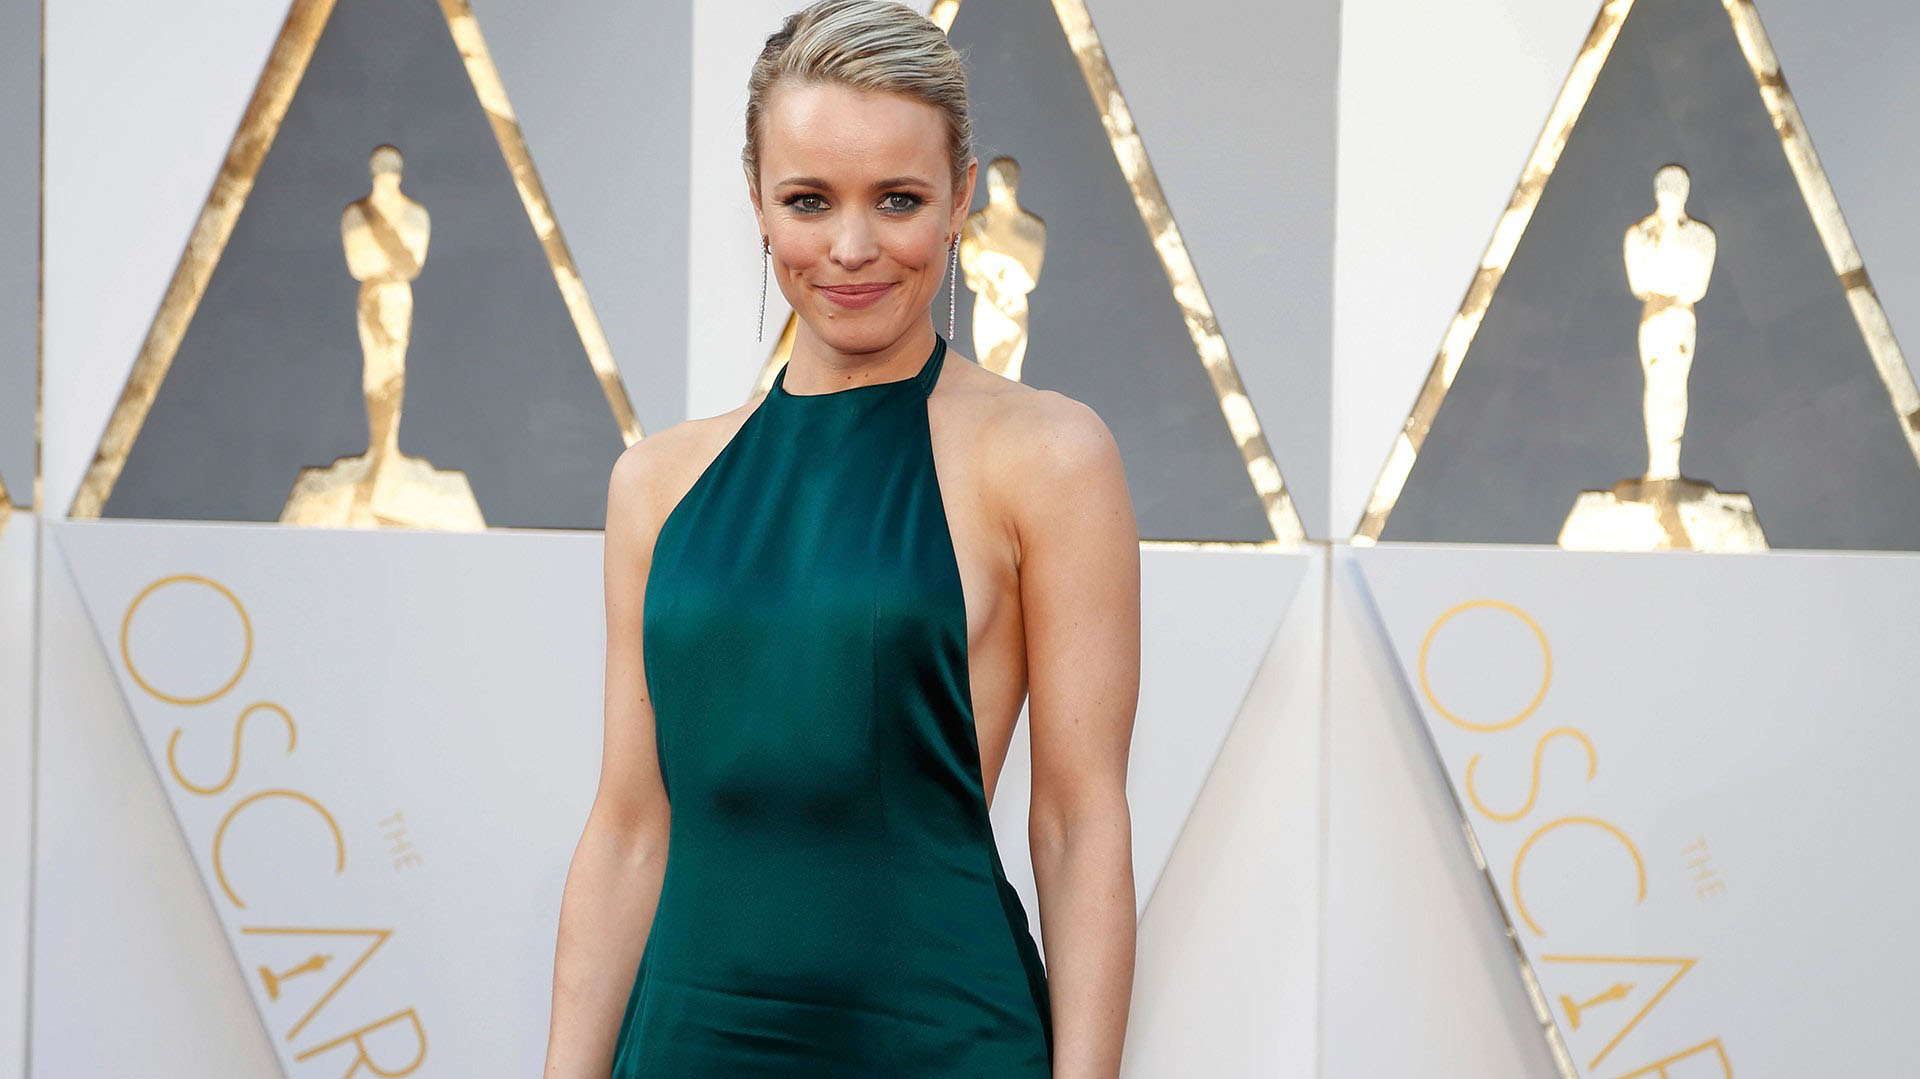 Before being an Oscar-nominated actress, Rachel McAdams worked at a McDonald's (Getty Images)